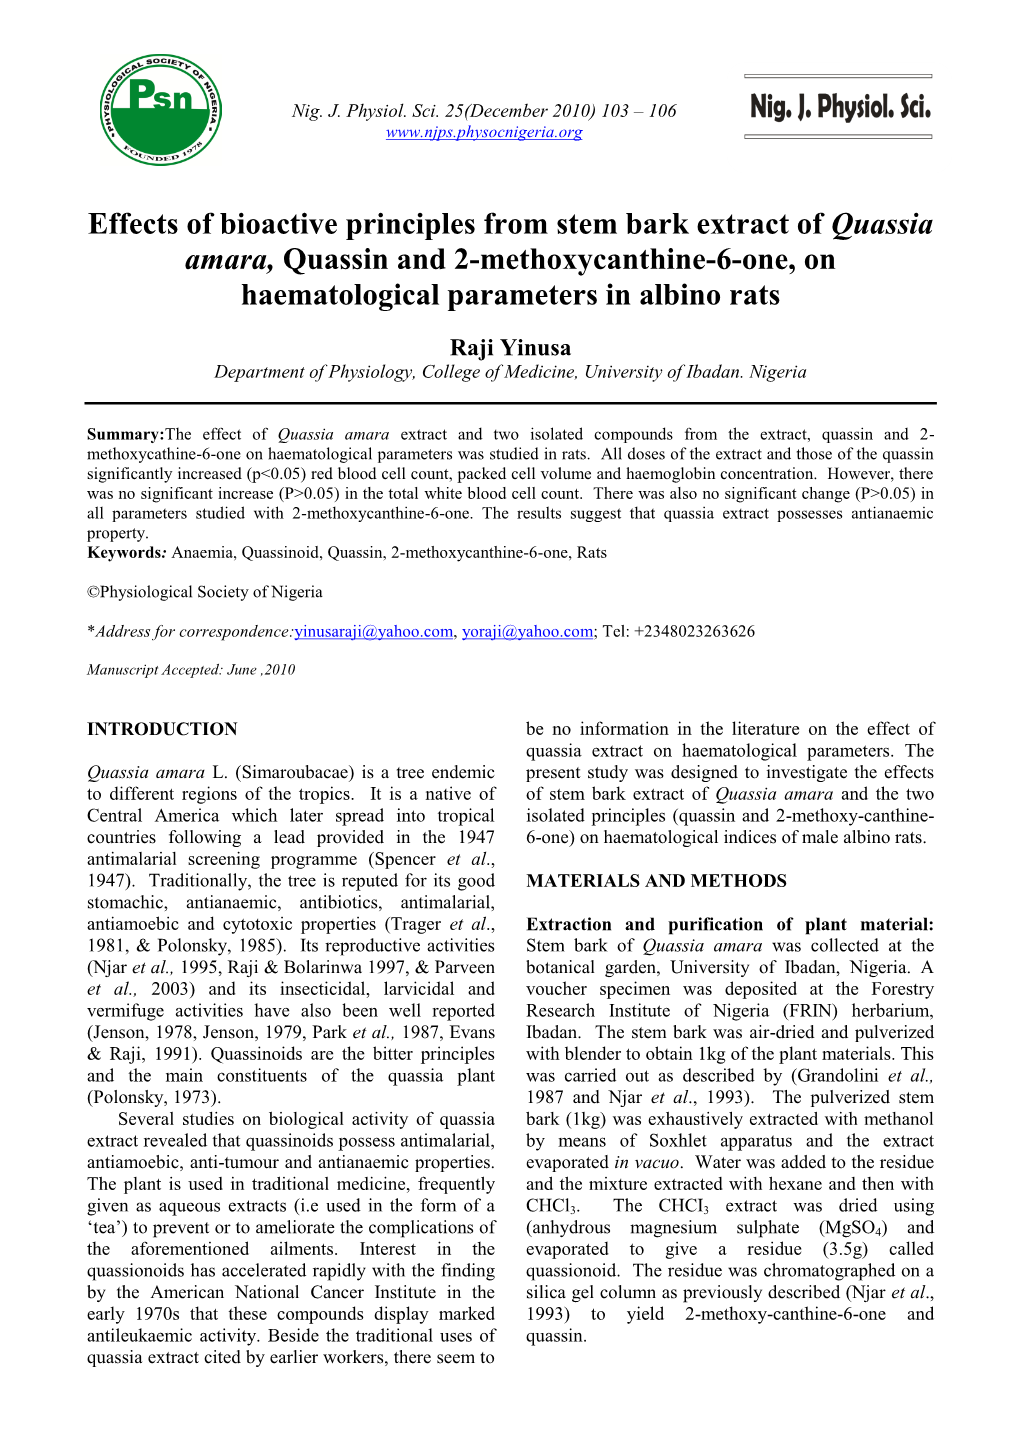 Effects of Bioactive Principles from Stem Bark Extract of Quassia Amara, Quassin and 2-Methoxycanthine-6-One, on Haematological Parameters in Albino Rats